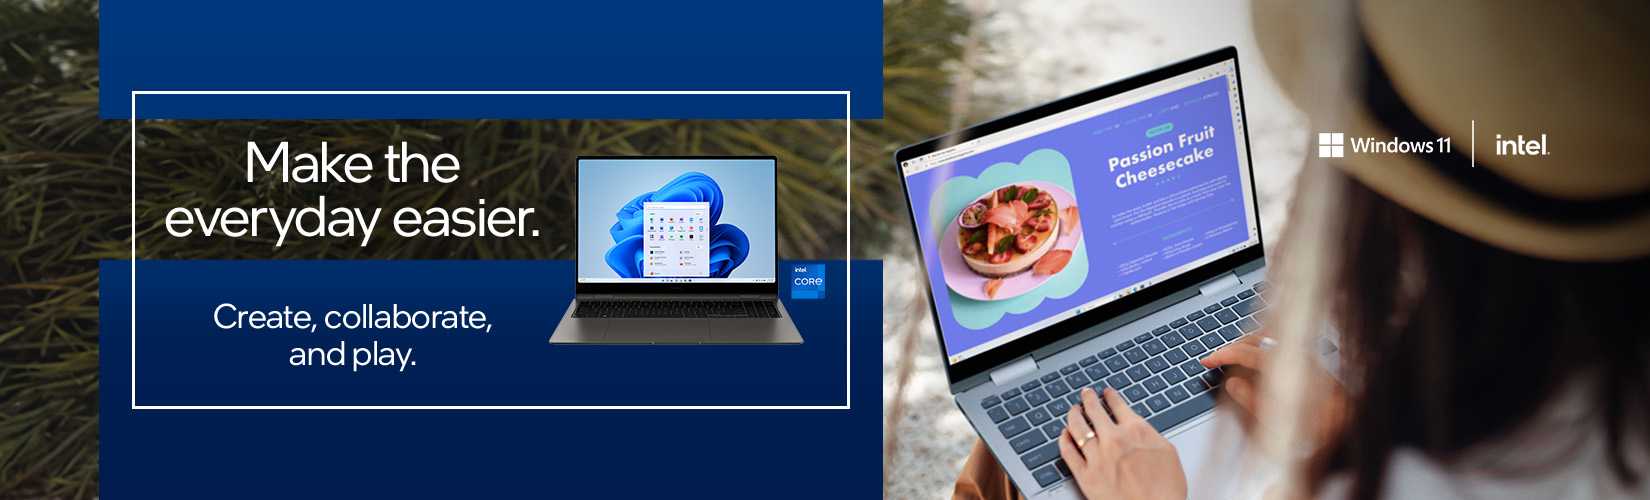 Intel. Make the everyday easier. Create, collaborate, and play.